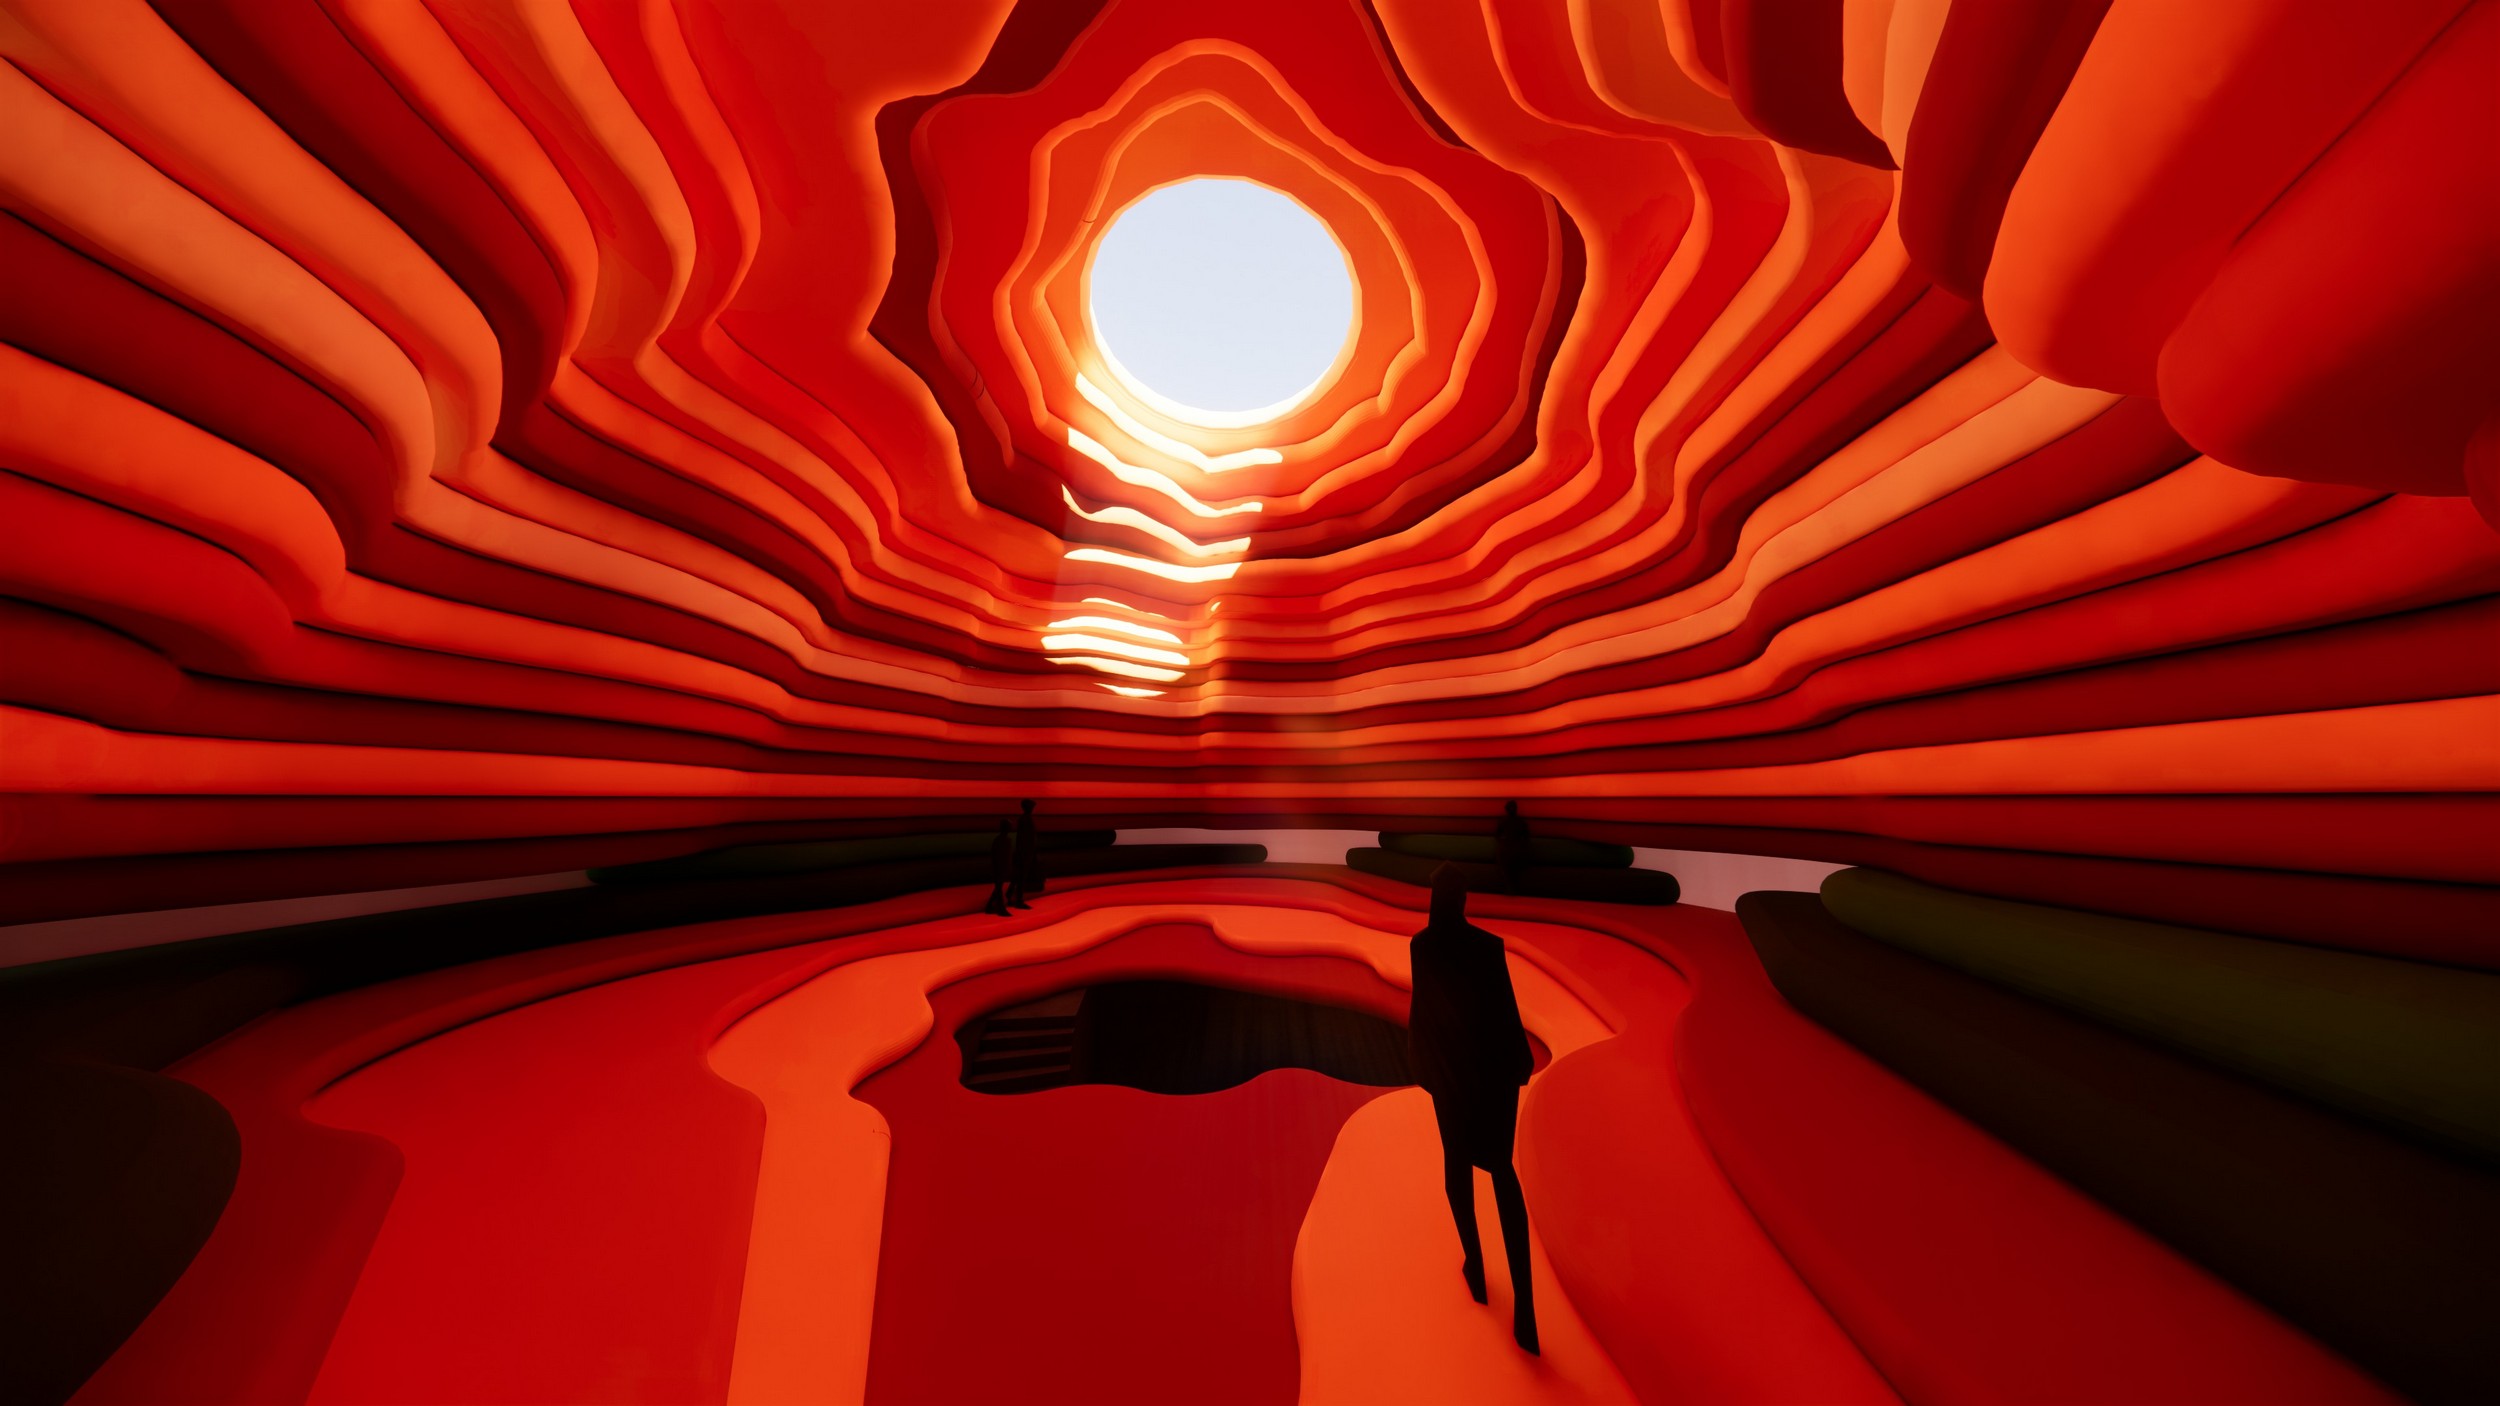 Concept render of the 'Positive Room' by Alistair Badger. Space has soft curves and a central circular window in ceiling, furnishings and walls are red and organe hues.